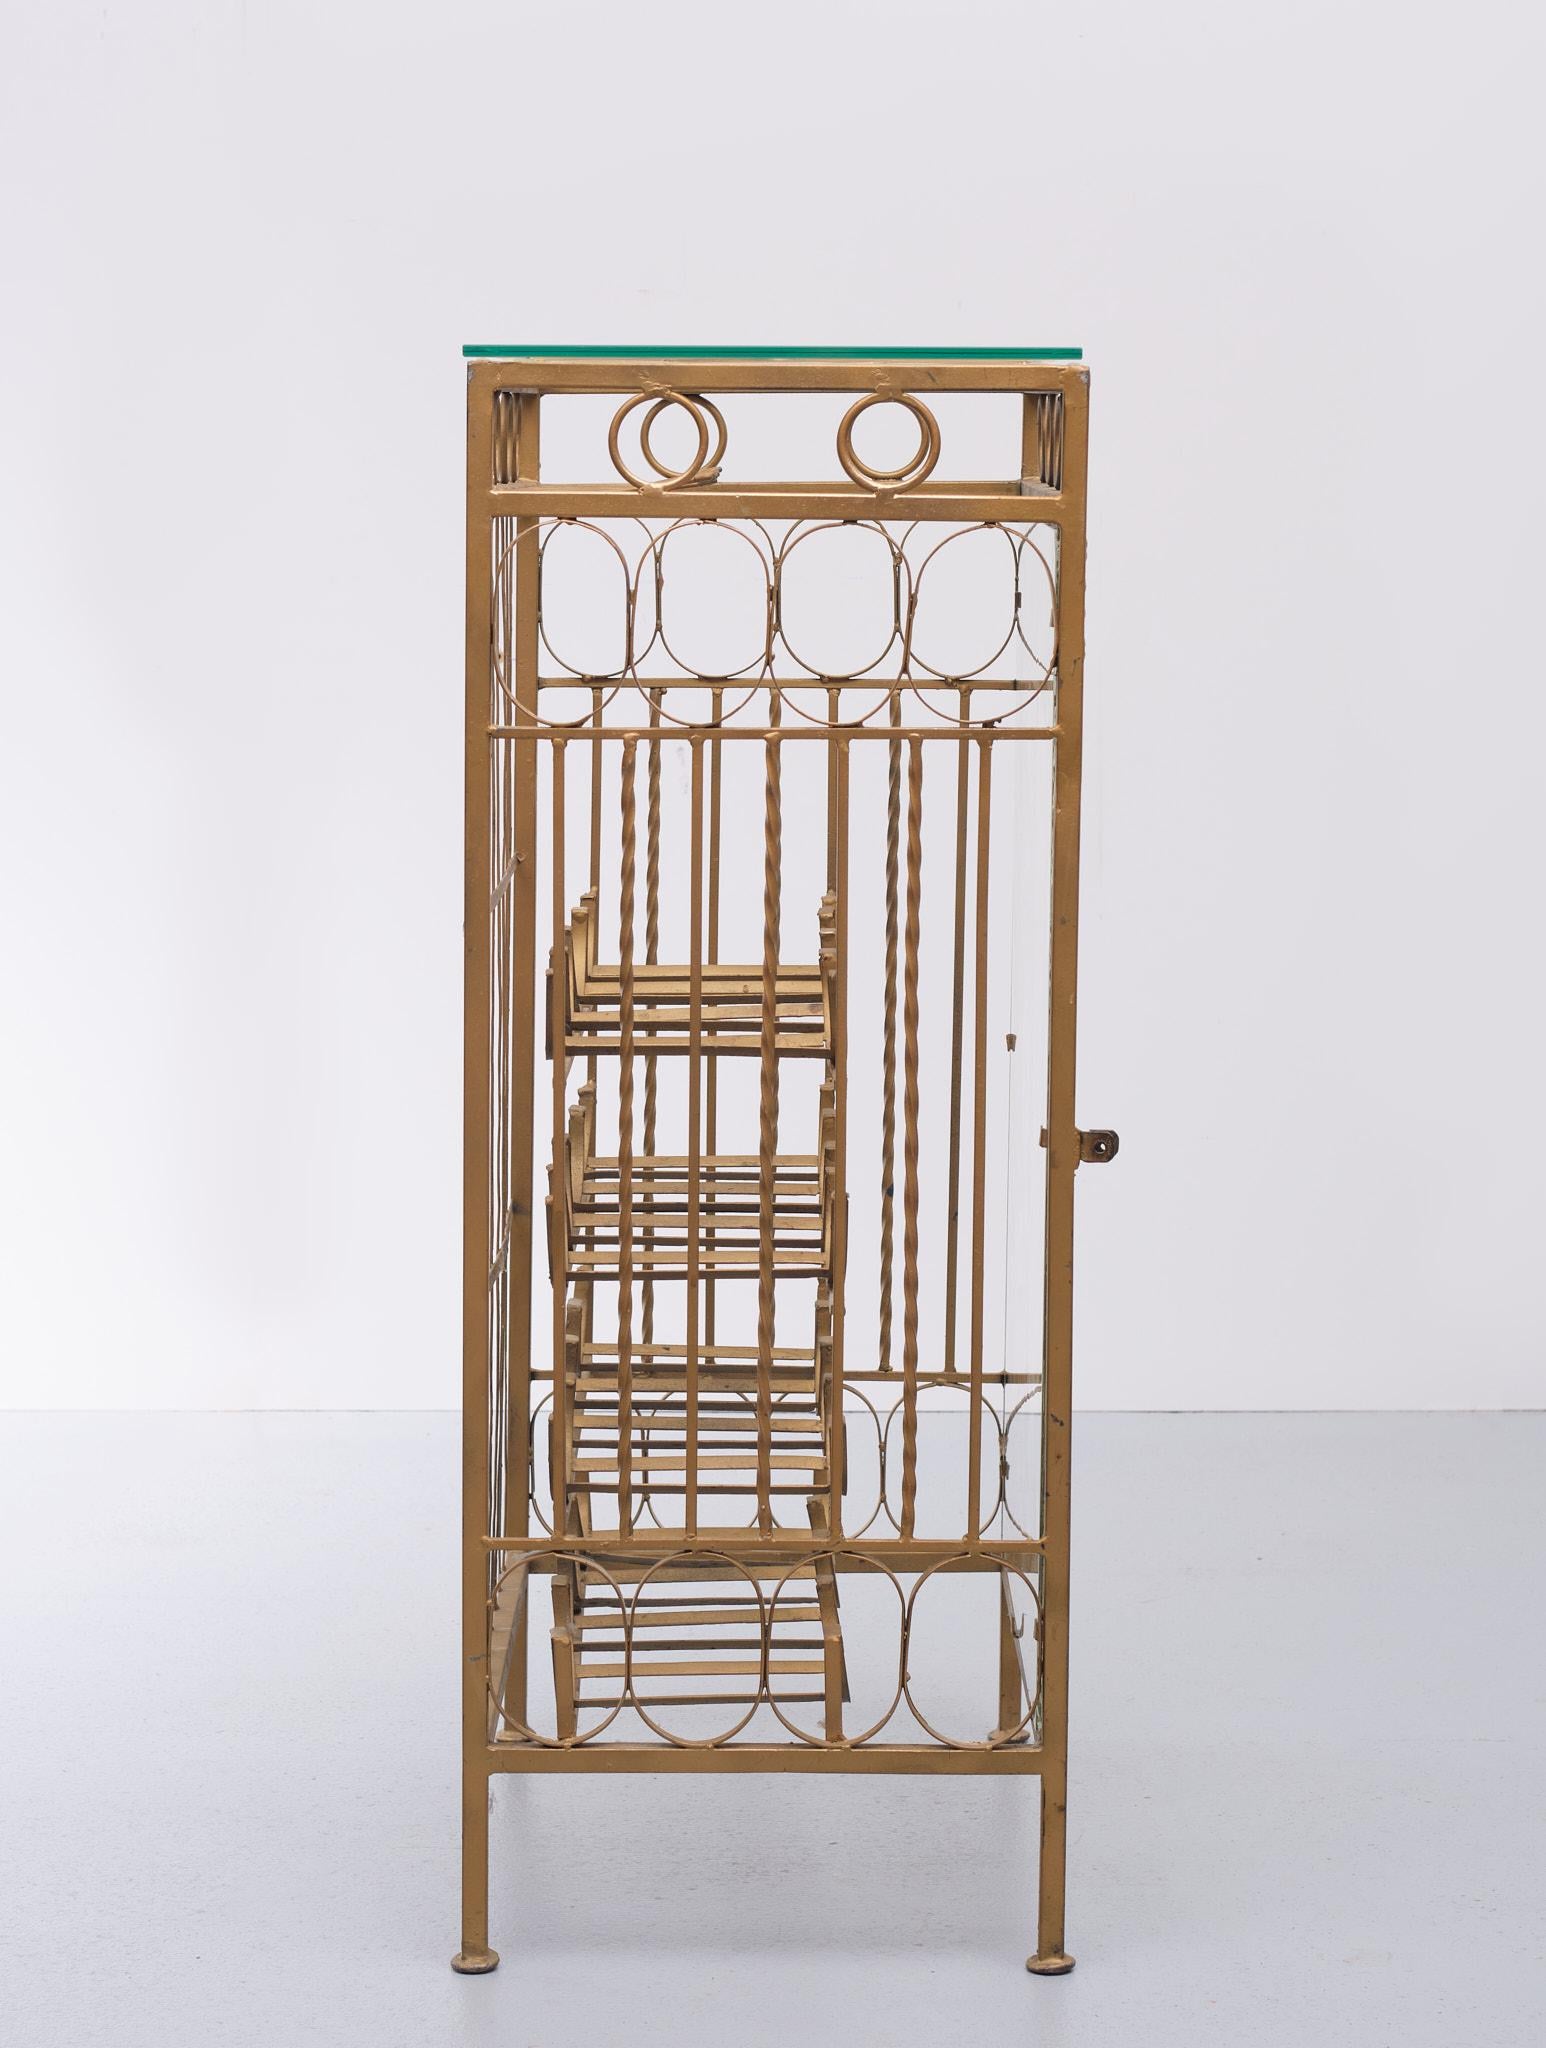 Gold Metal Wine Rack or Cocktail Bar, 1950s, Italy In Good Condition For Sale In Den Haag, NL